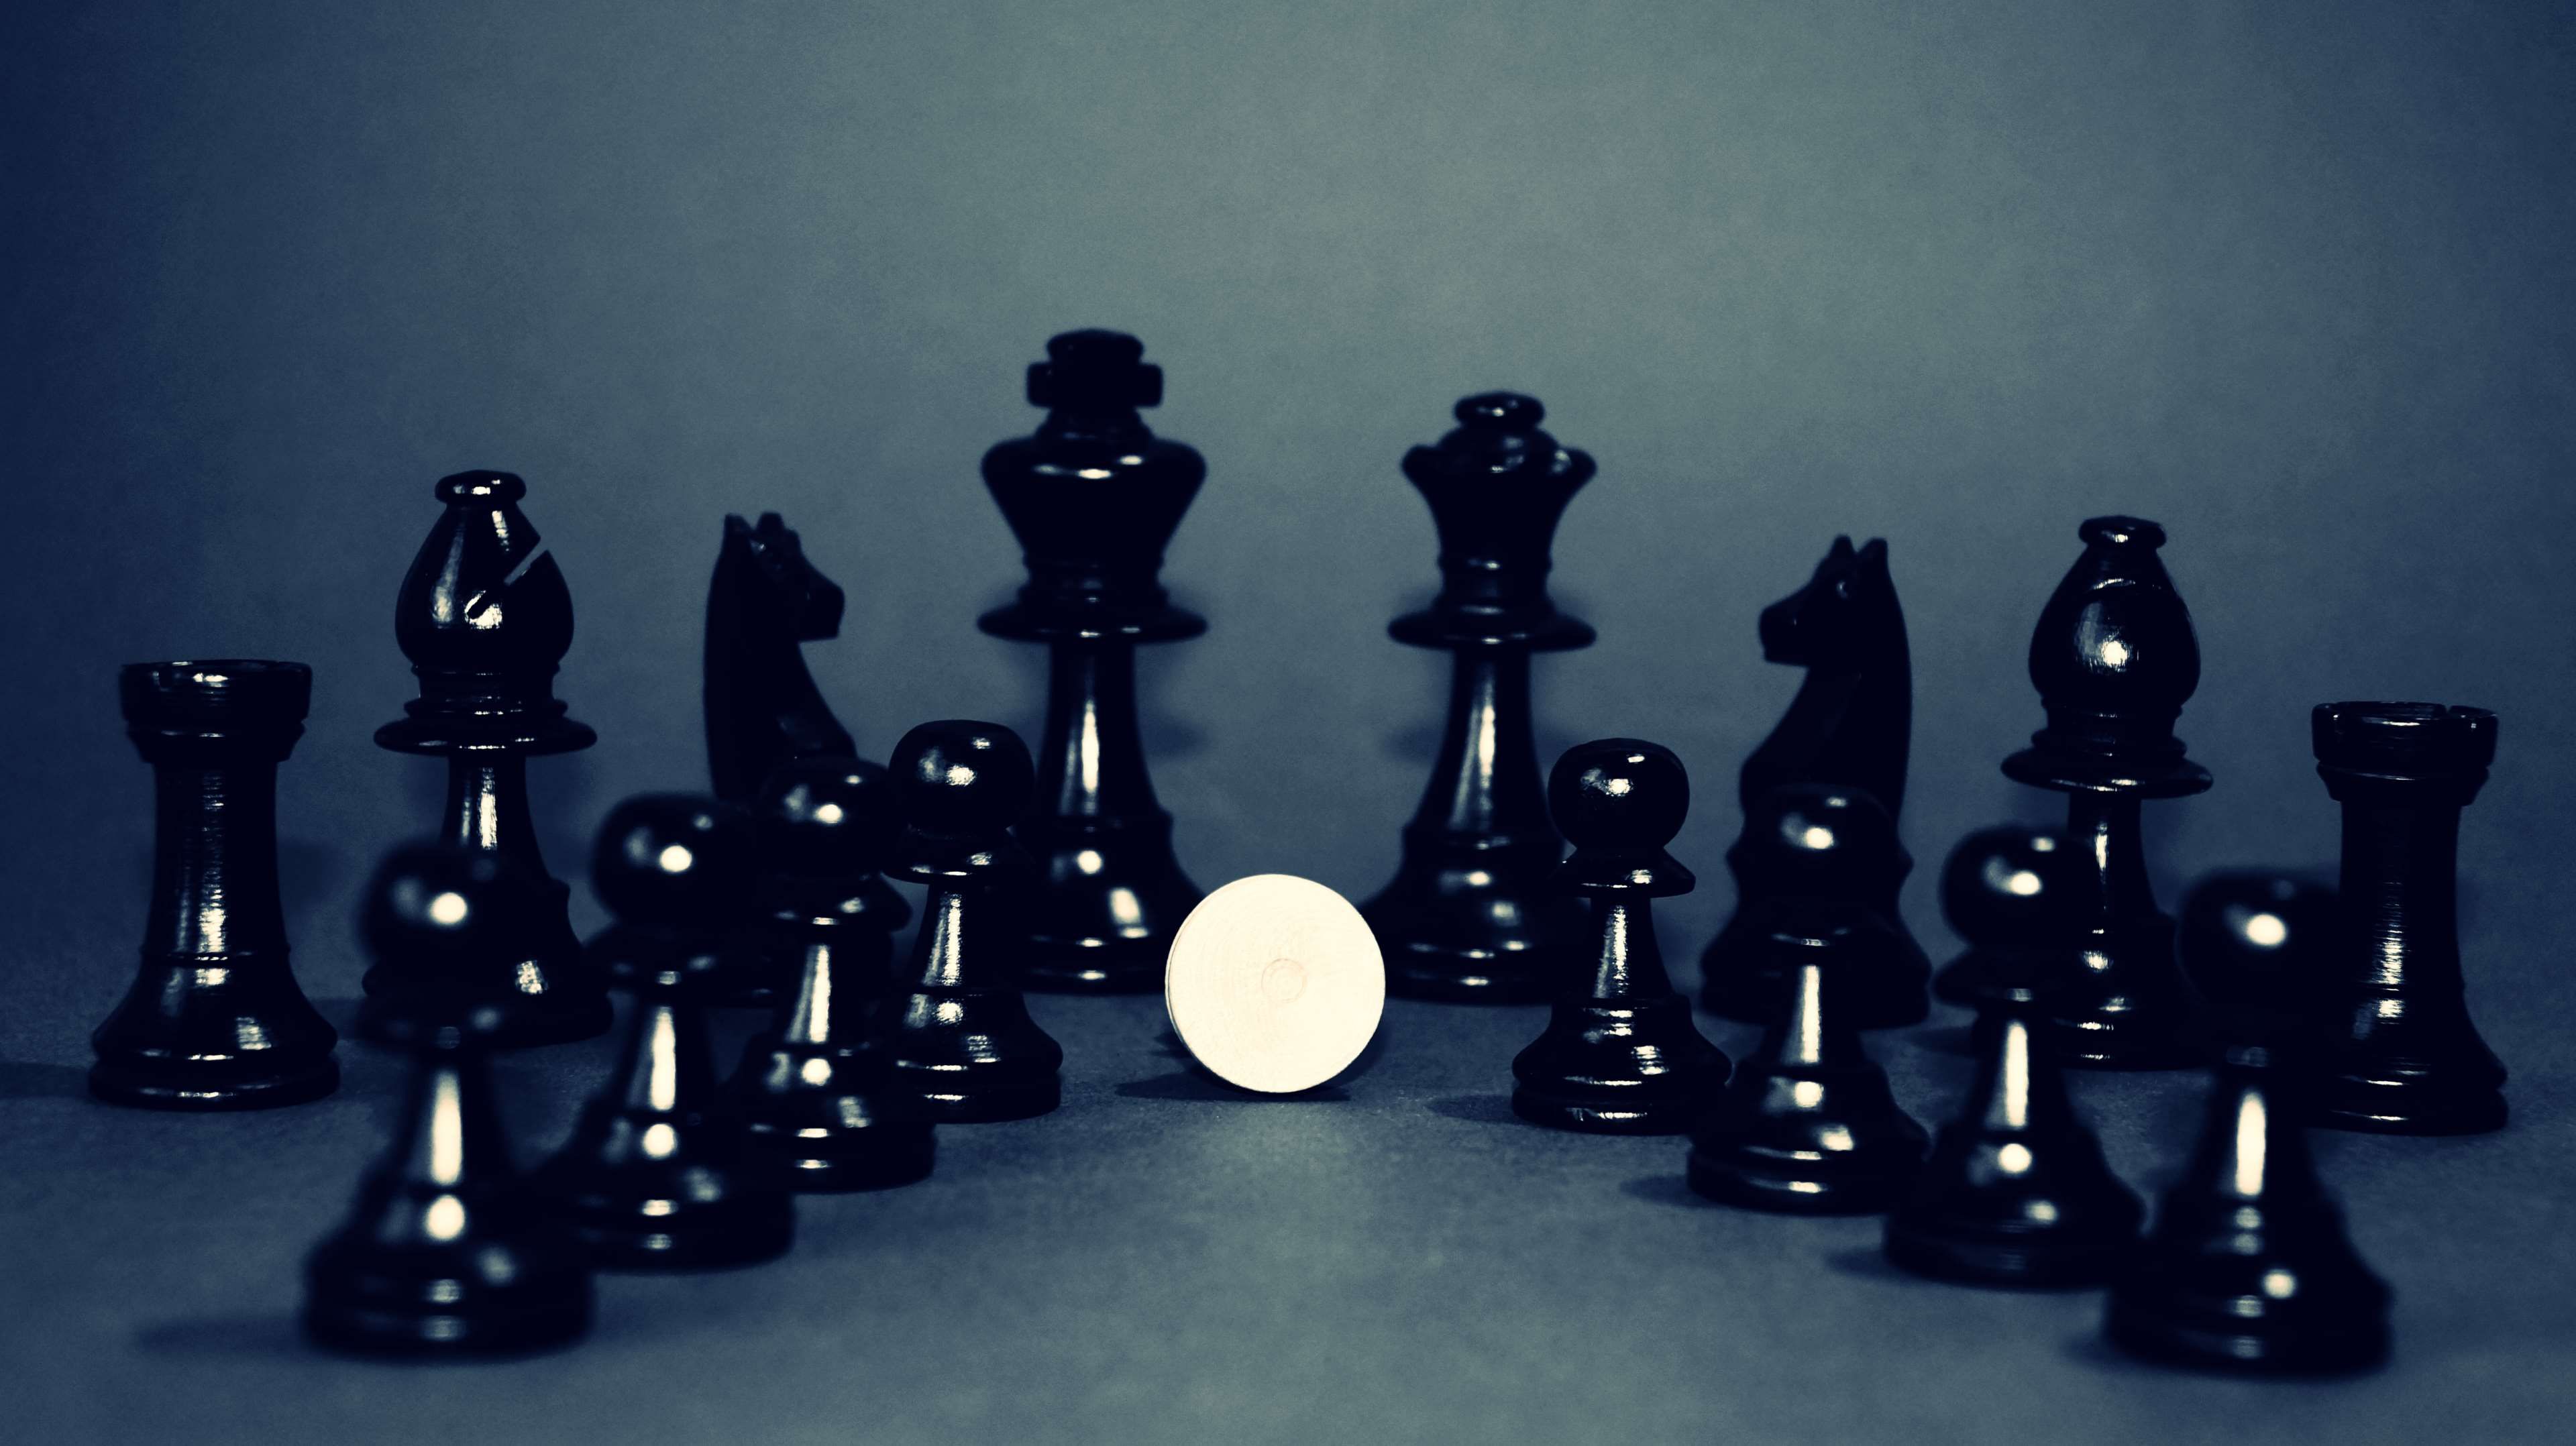 black and white, chess, chess pieces, king, knights, pawn, queen, white 4k wallpaper. Mocah.org HD Desktop Wallpaper